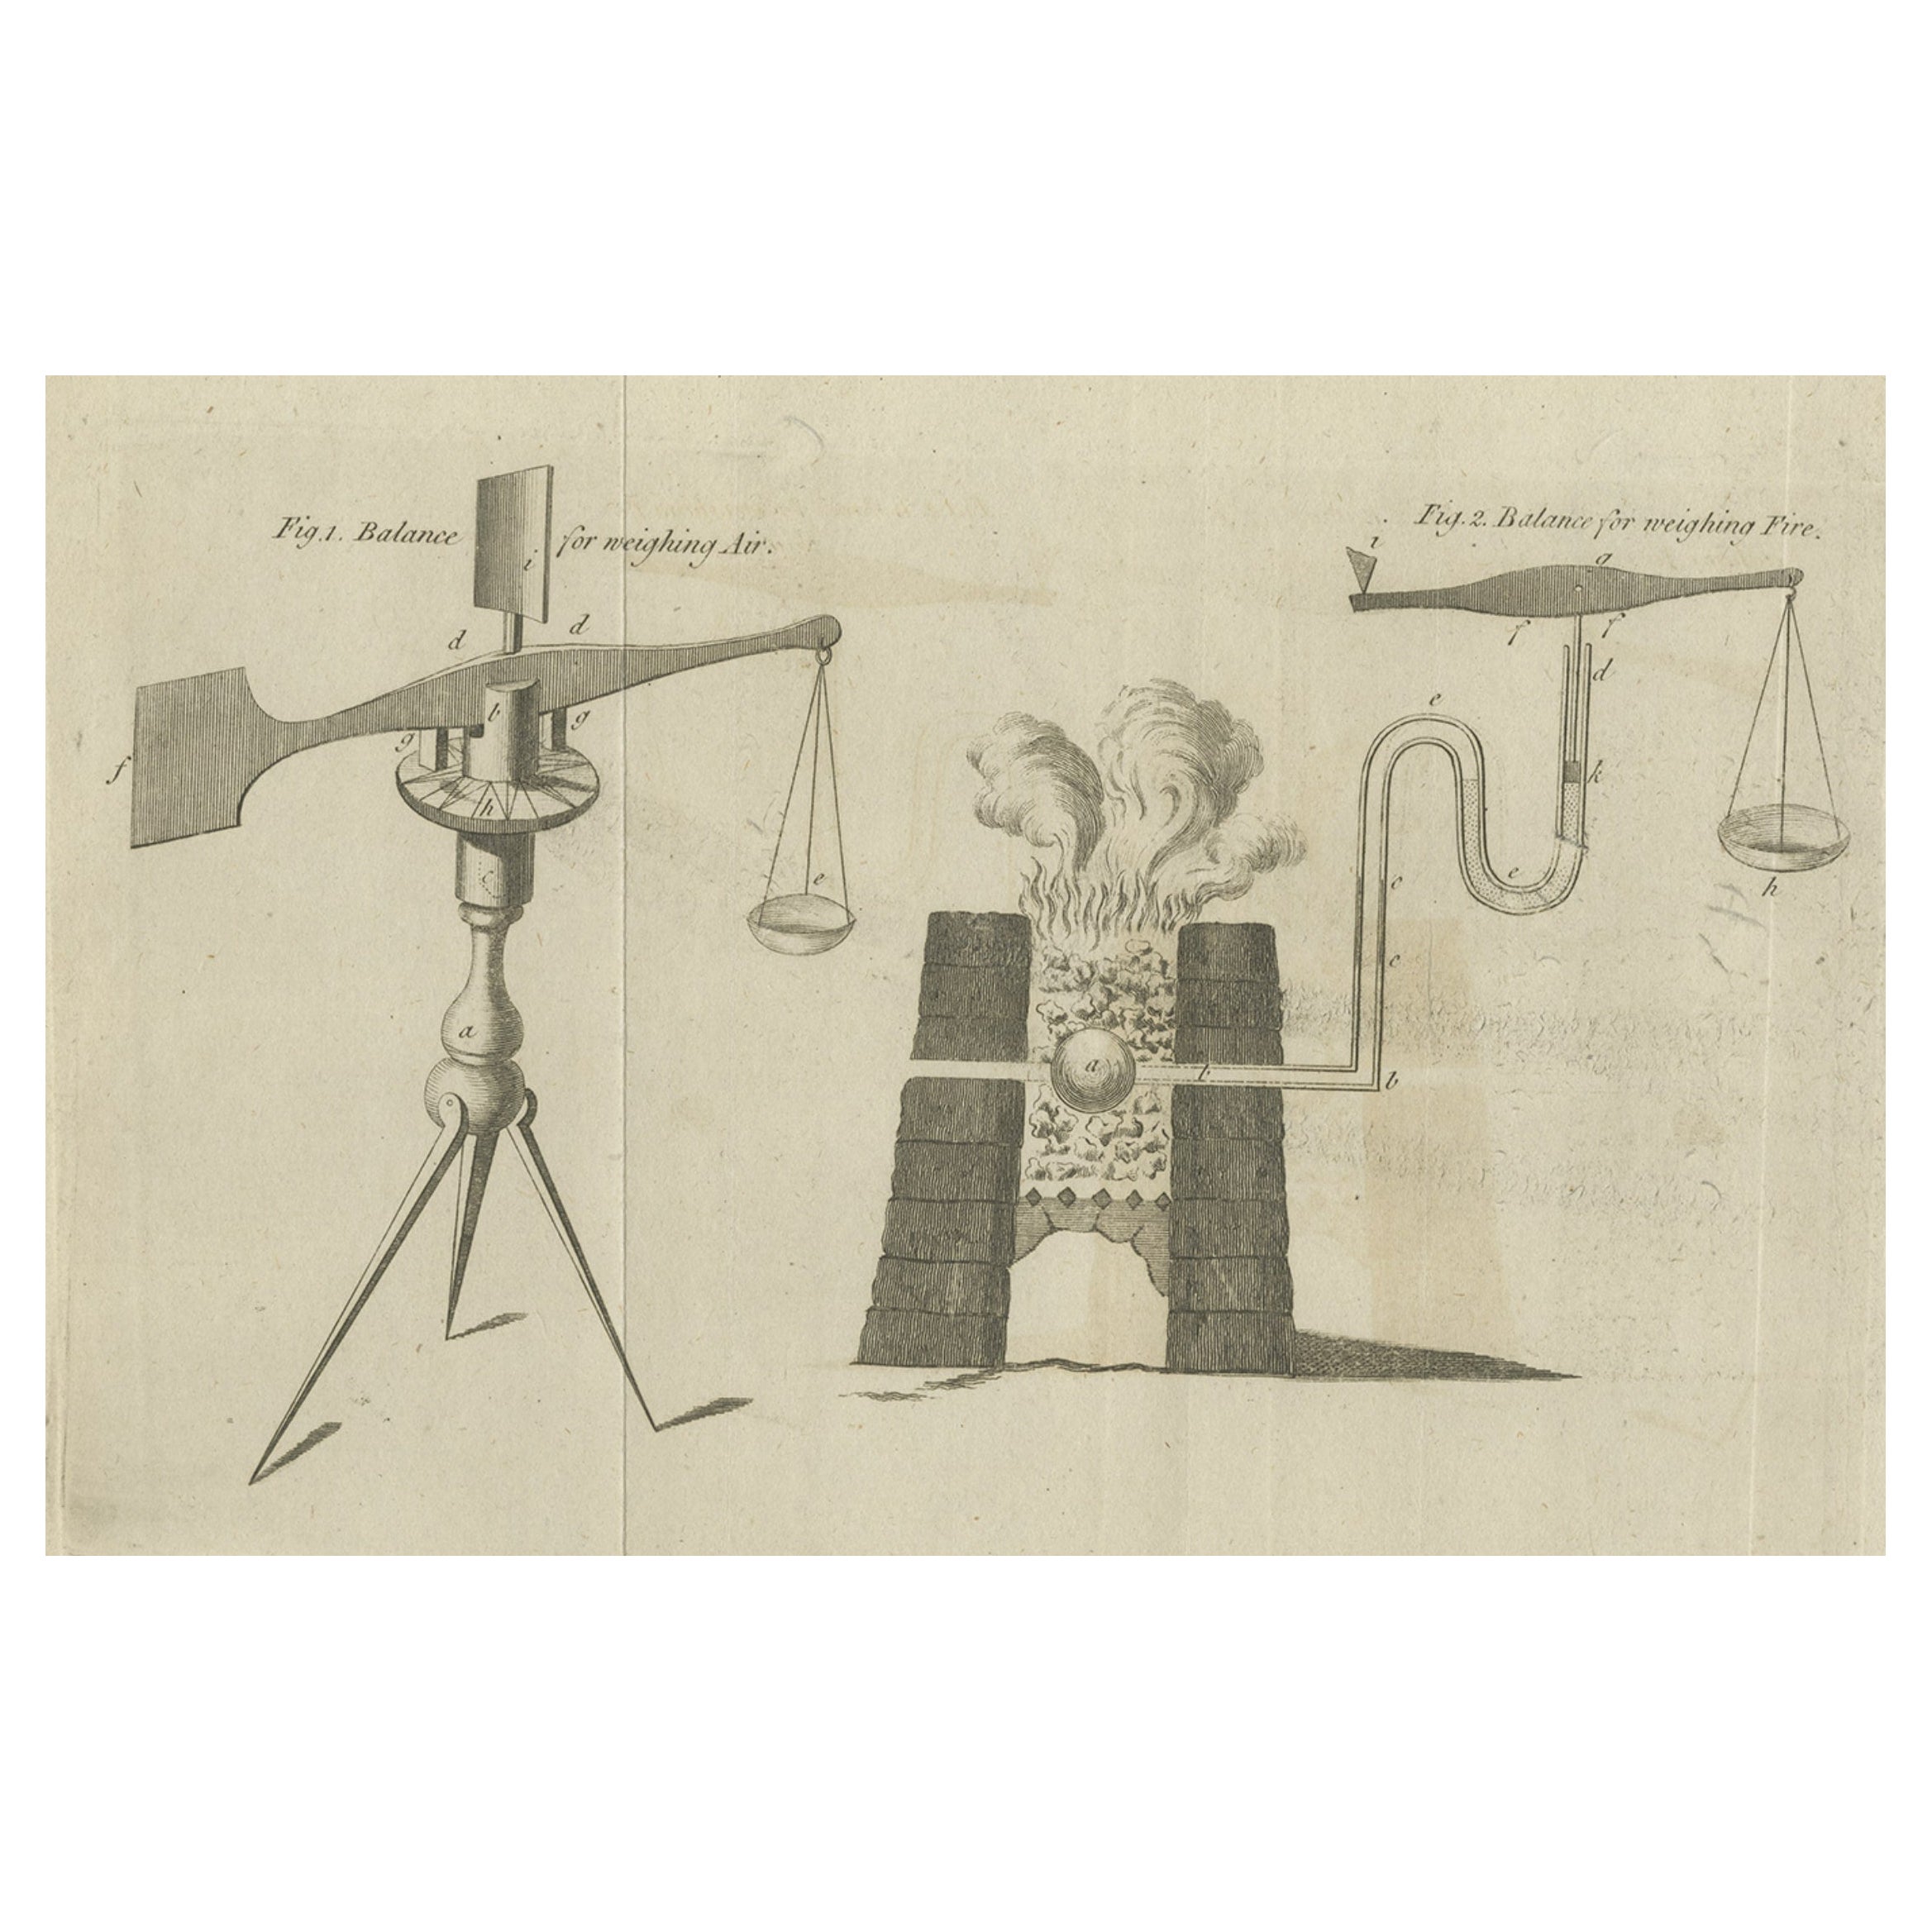 Antique Print of Two Balances for Weighing Fire and Air, c.1780 For Sale